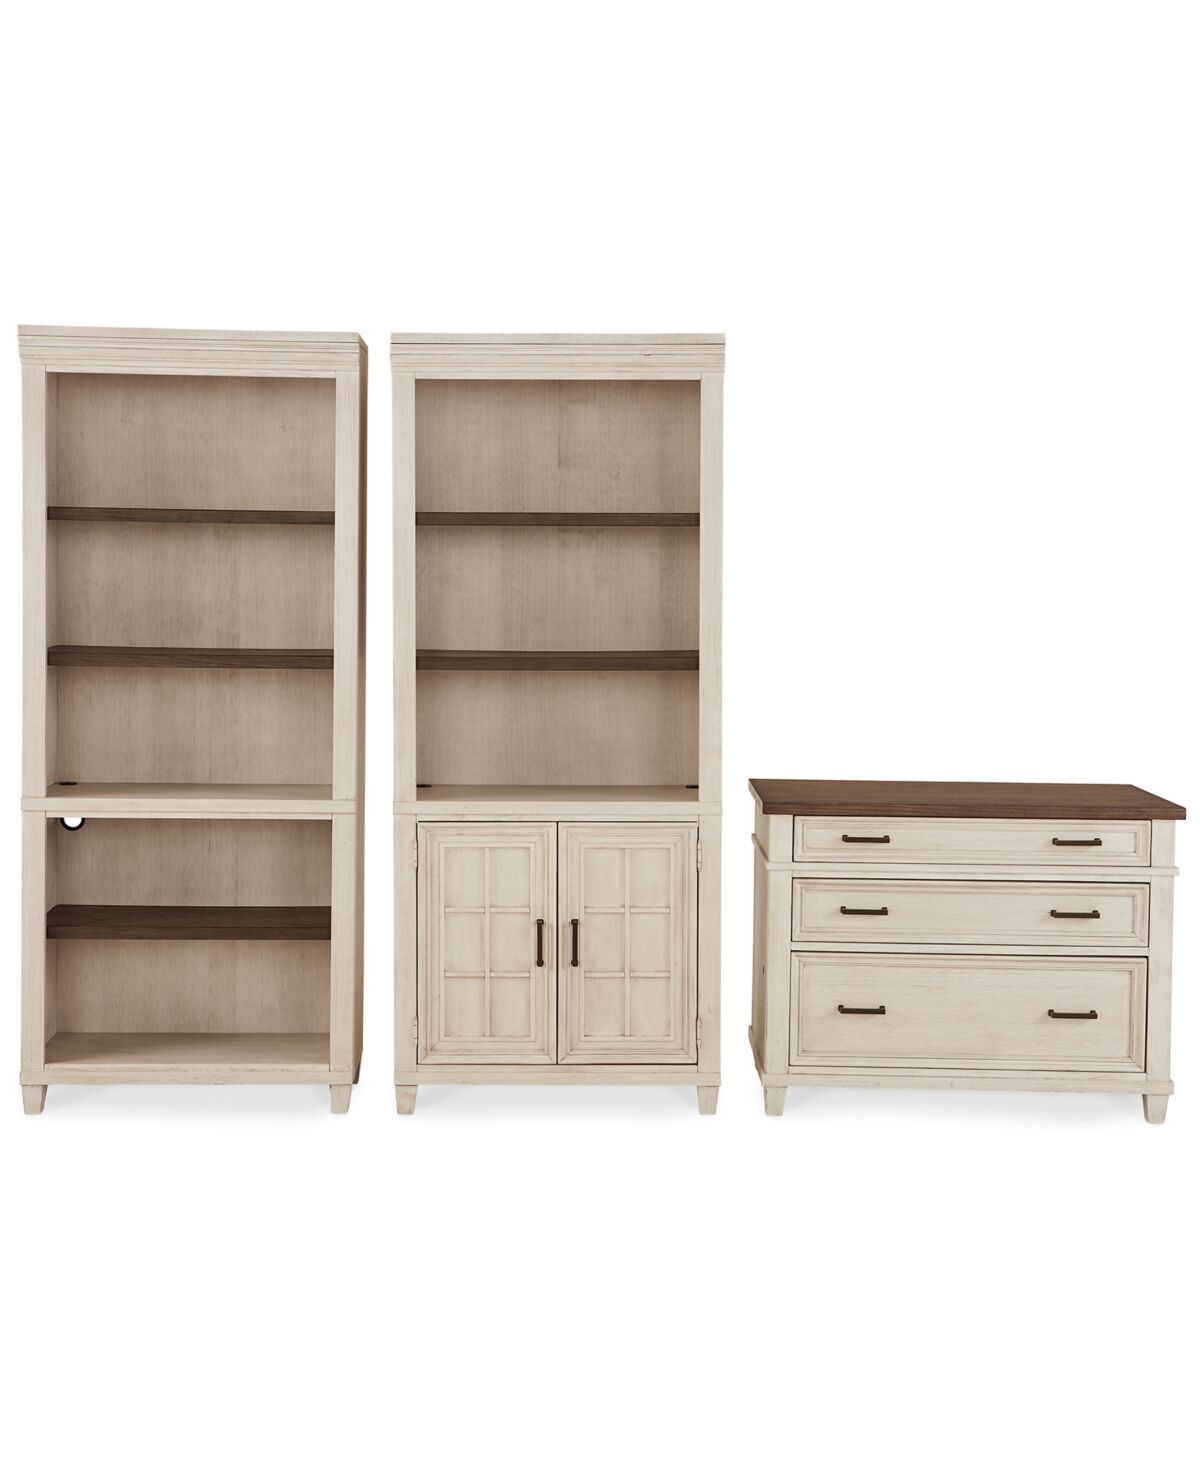 Furniture Dawnwood Home Office 3- Pc. Set (File, Open Bookcase, Door Bookcase) - Aged Ivory